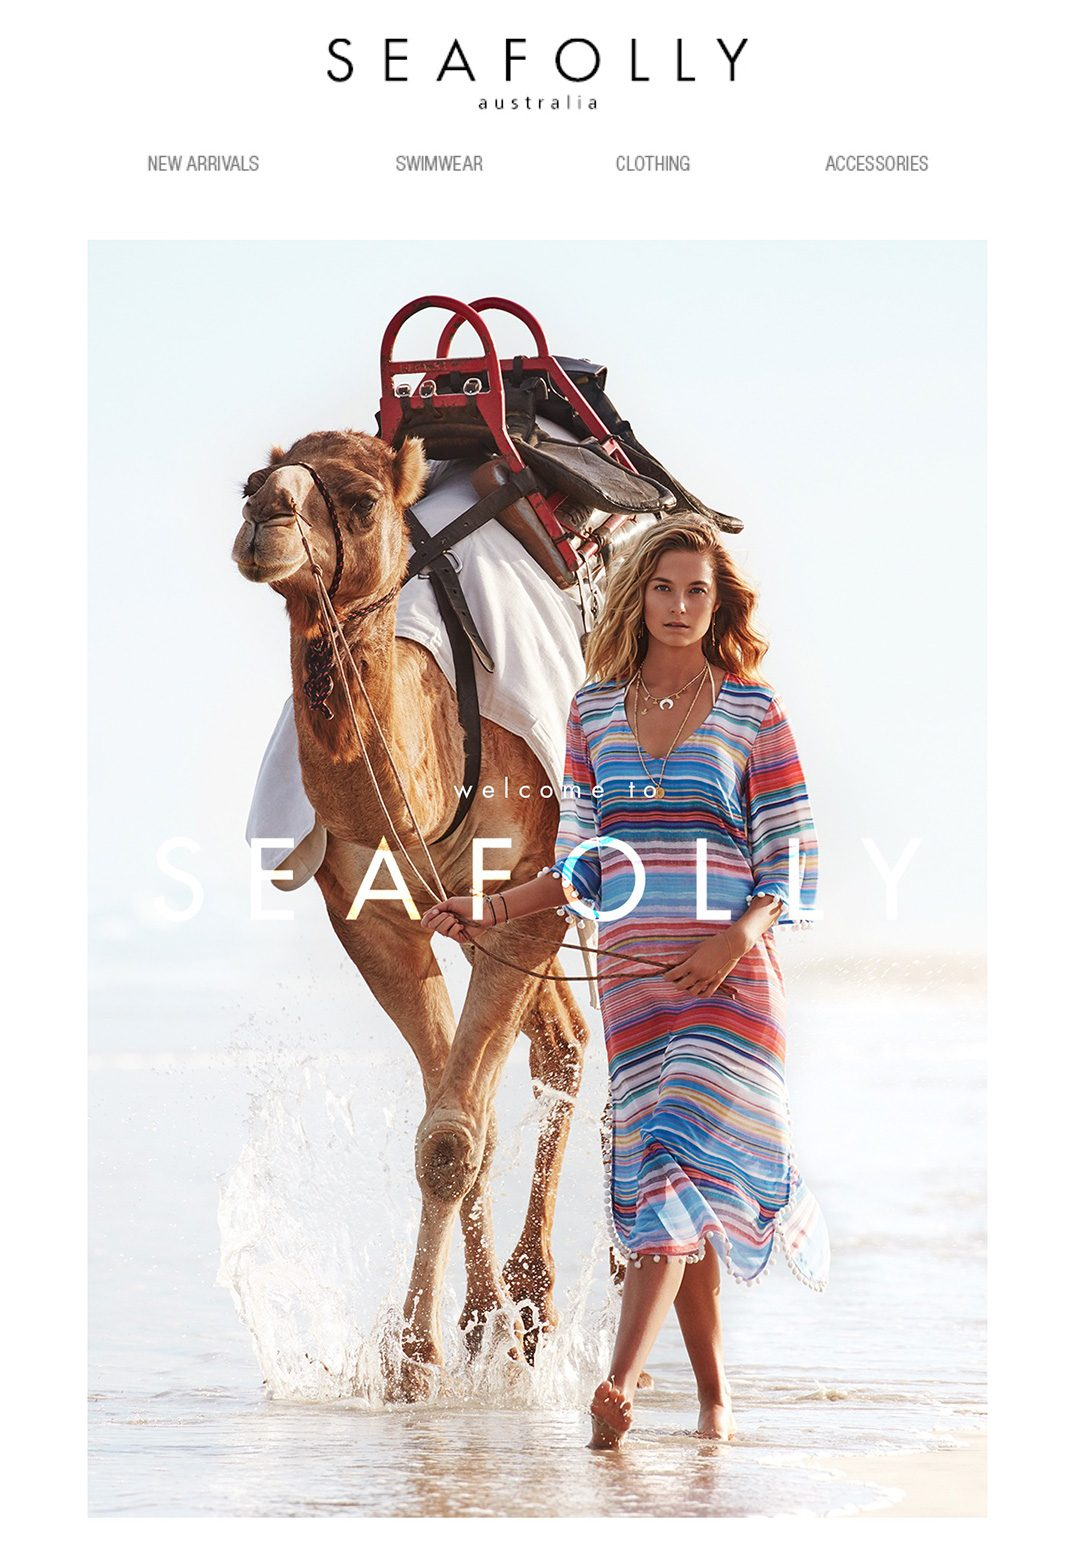 Seafolly email